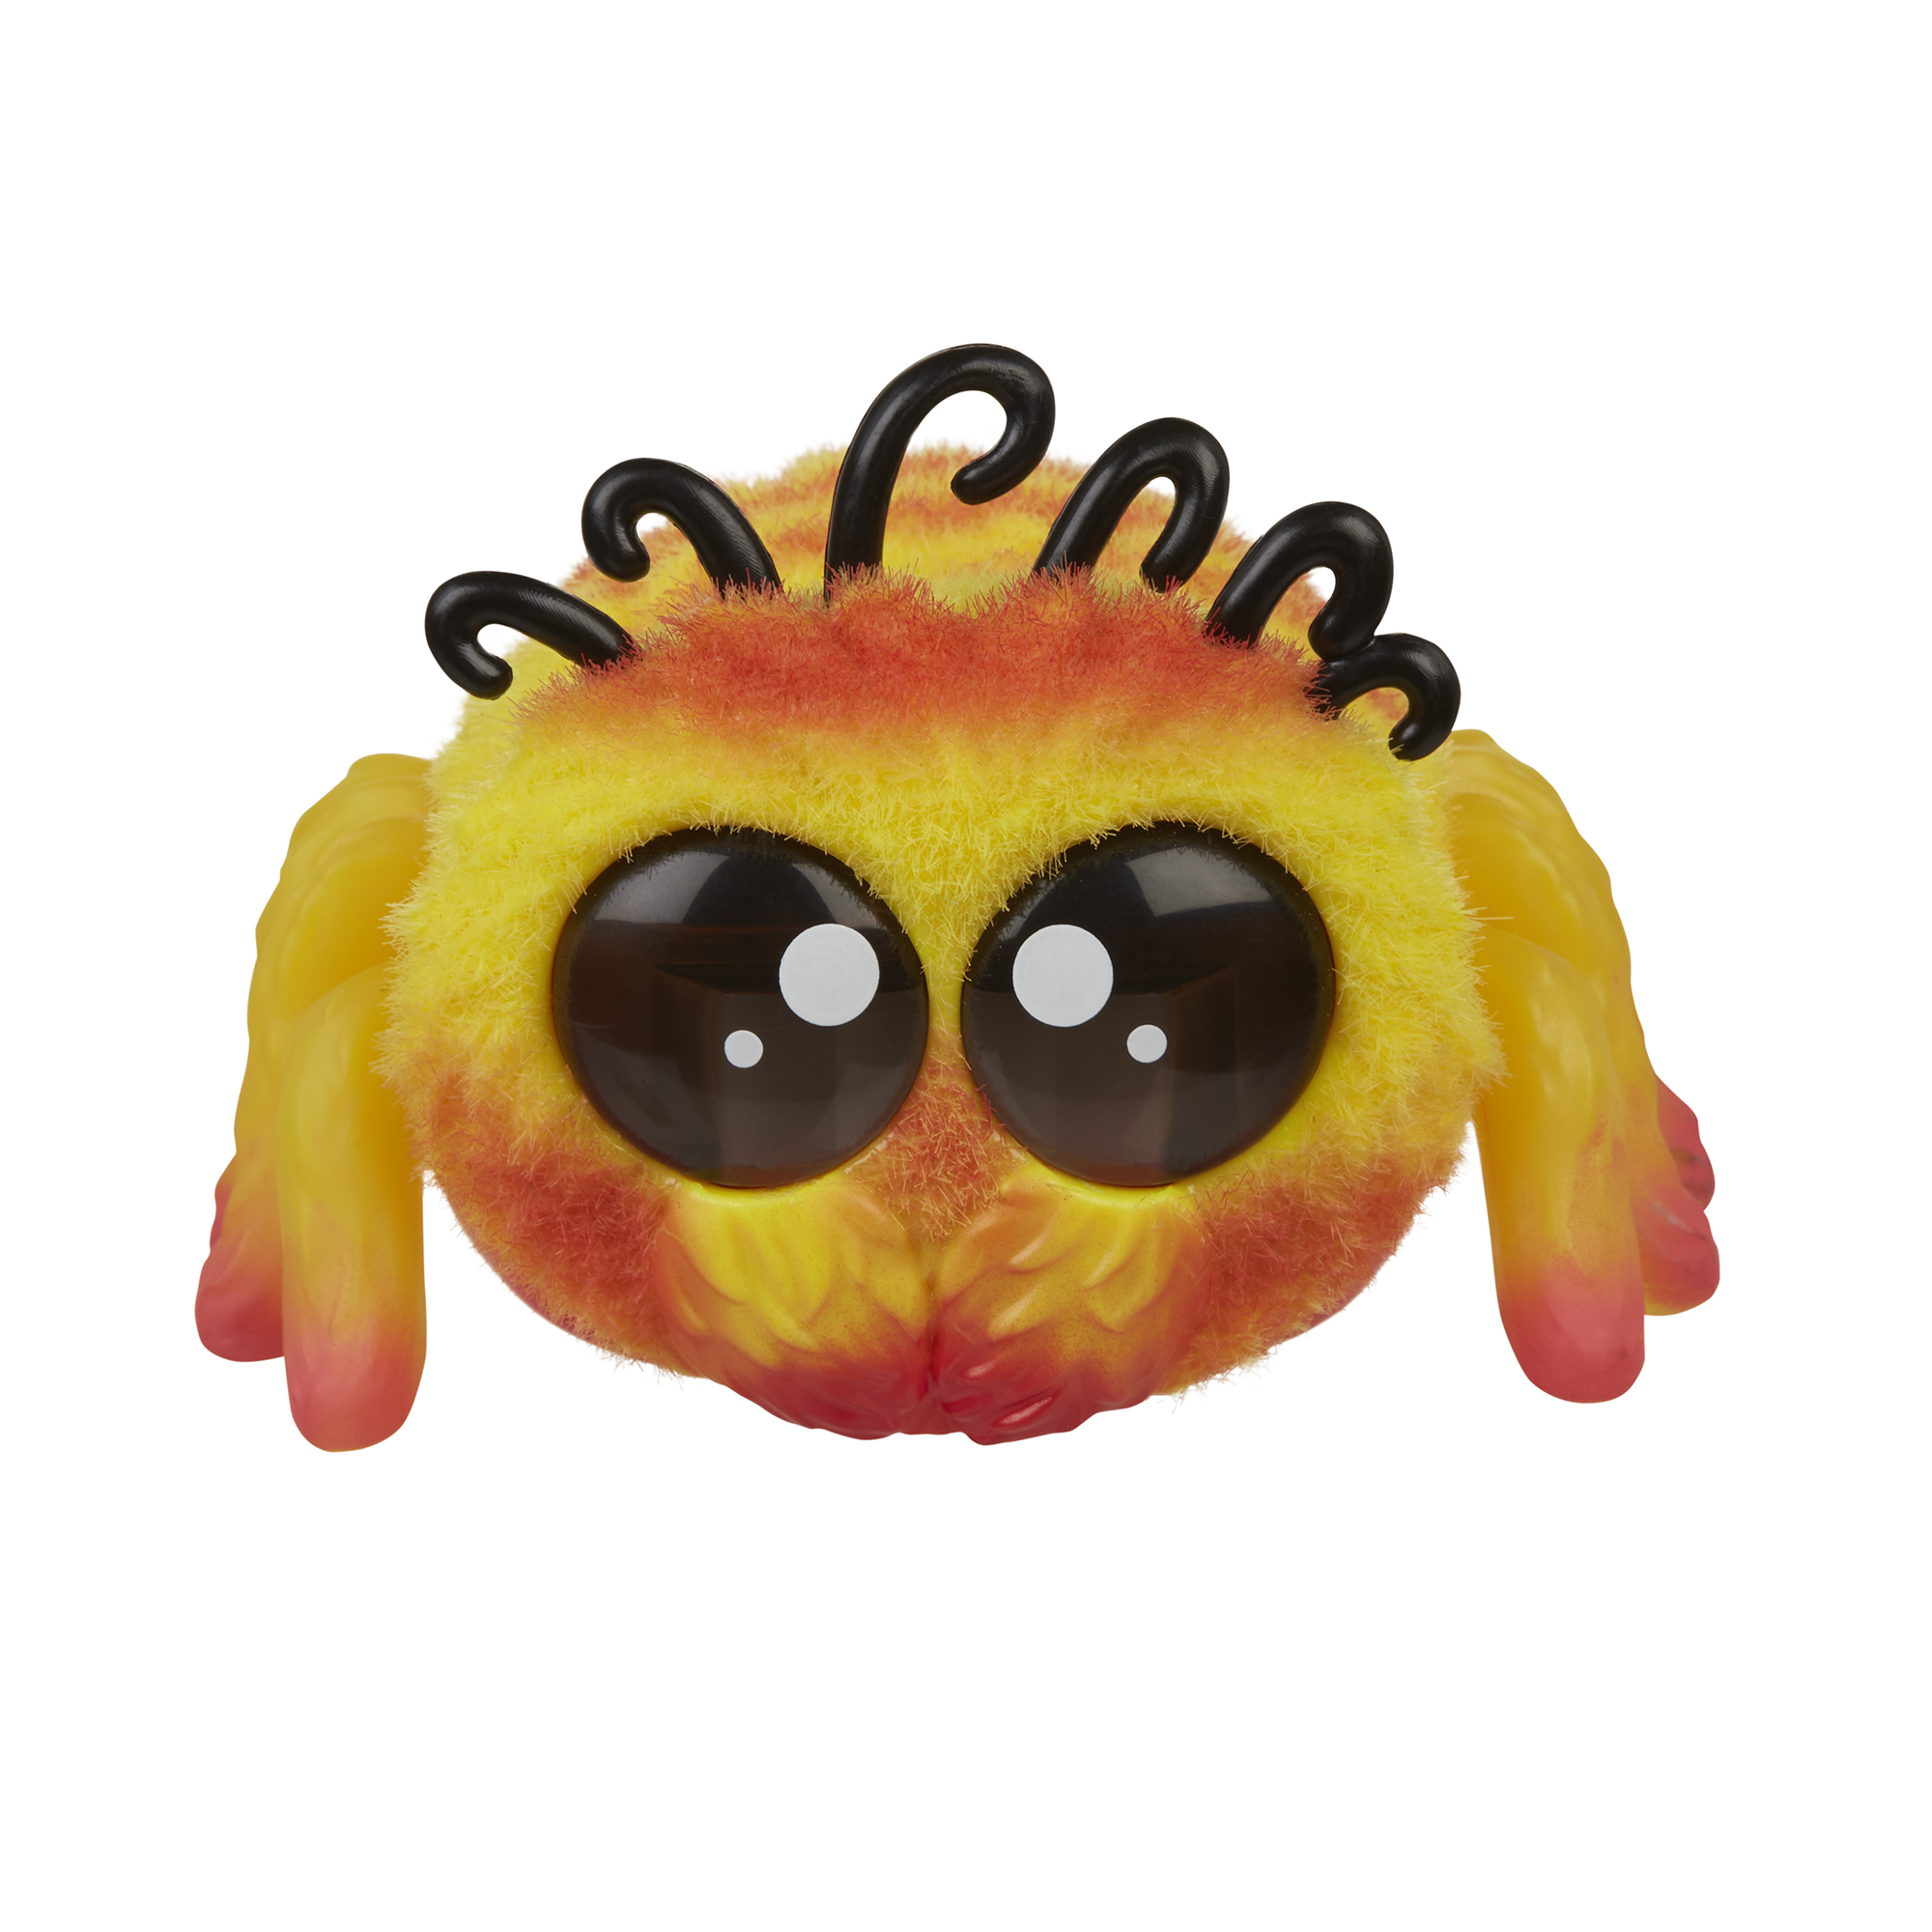 Yellies! Peeks; Voice-activated Spider Pet; Ages 5 and up - image 1 of 13